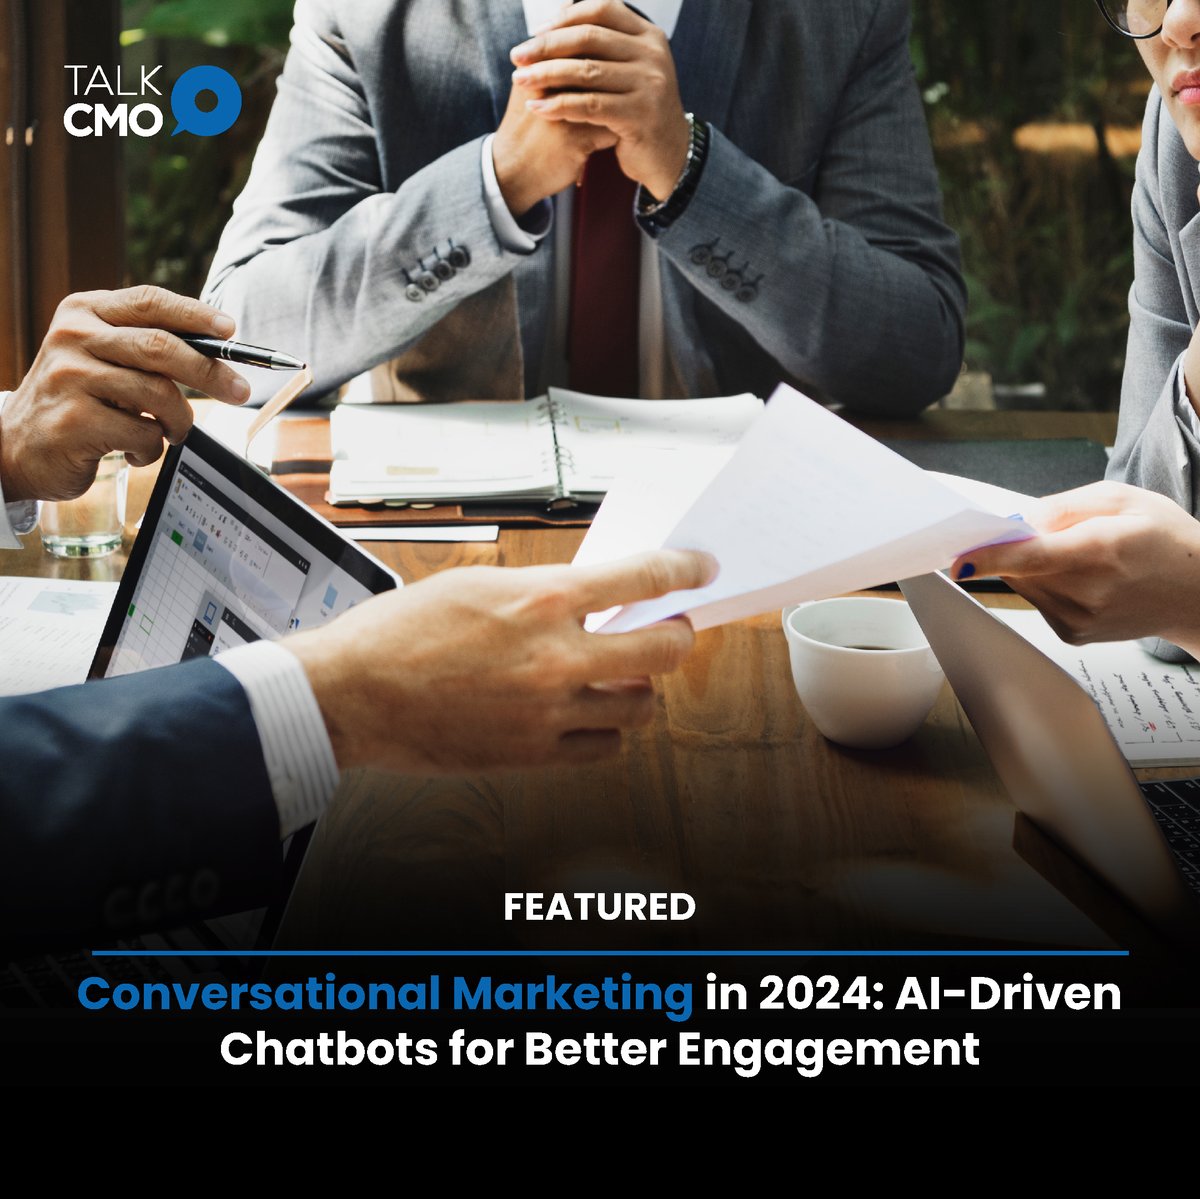 #Chatbots are becoming integral for great customer engagement. Their use of #NLP abilities ensures they can handle queries efficiently, deliver instant support, and resolve issues instantly. Read full: tcmo.in/4bMNMnF #customerexperience